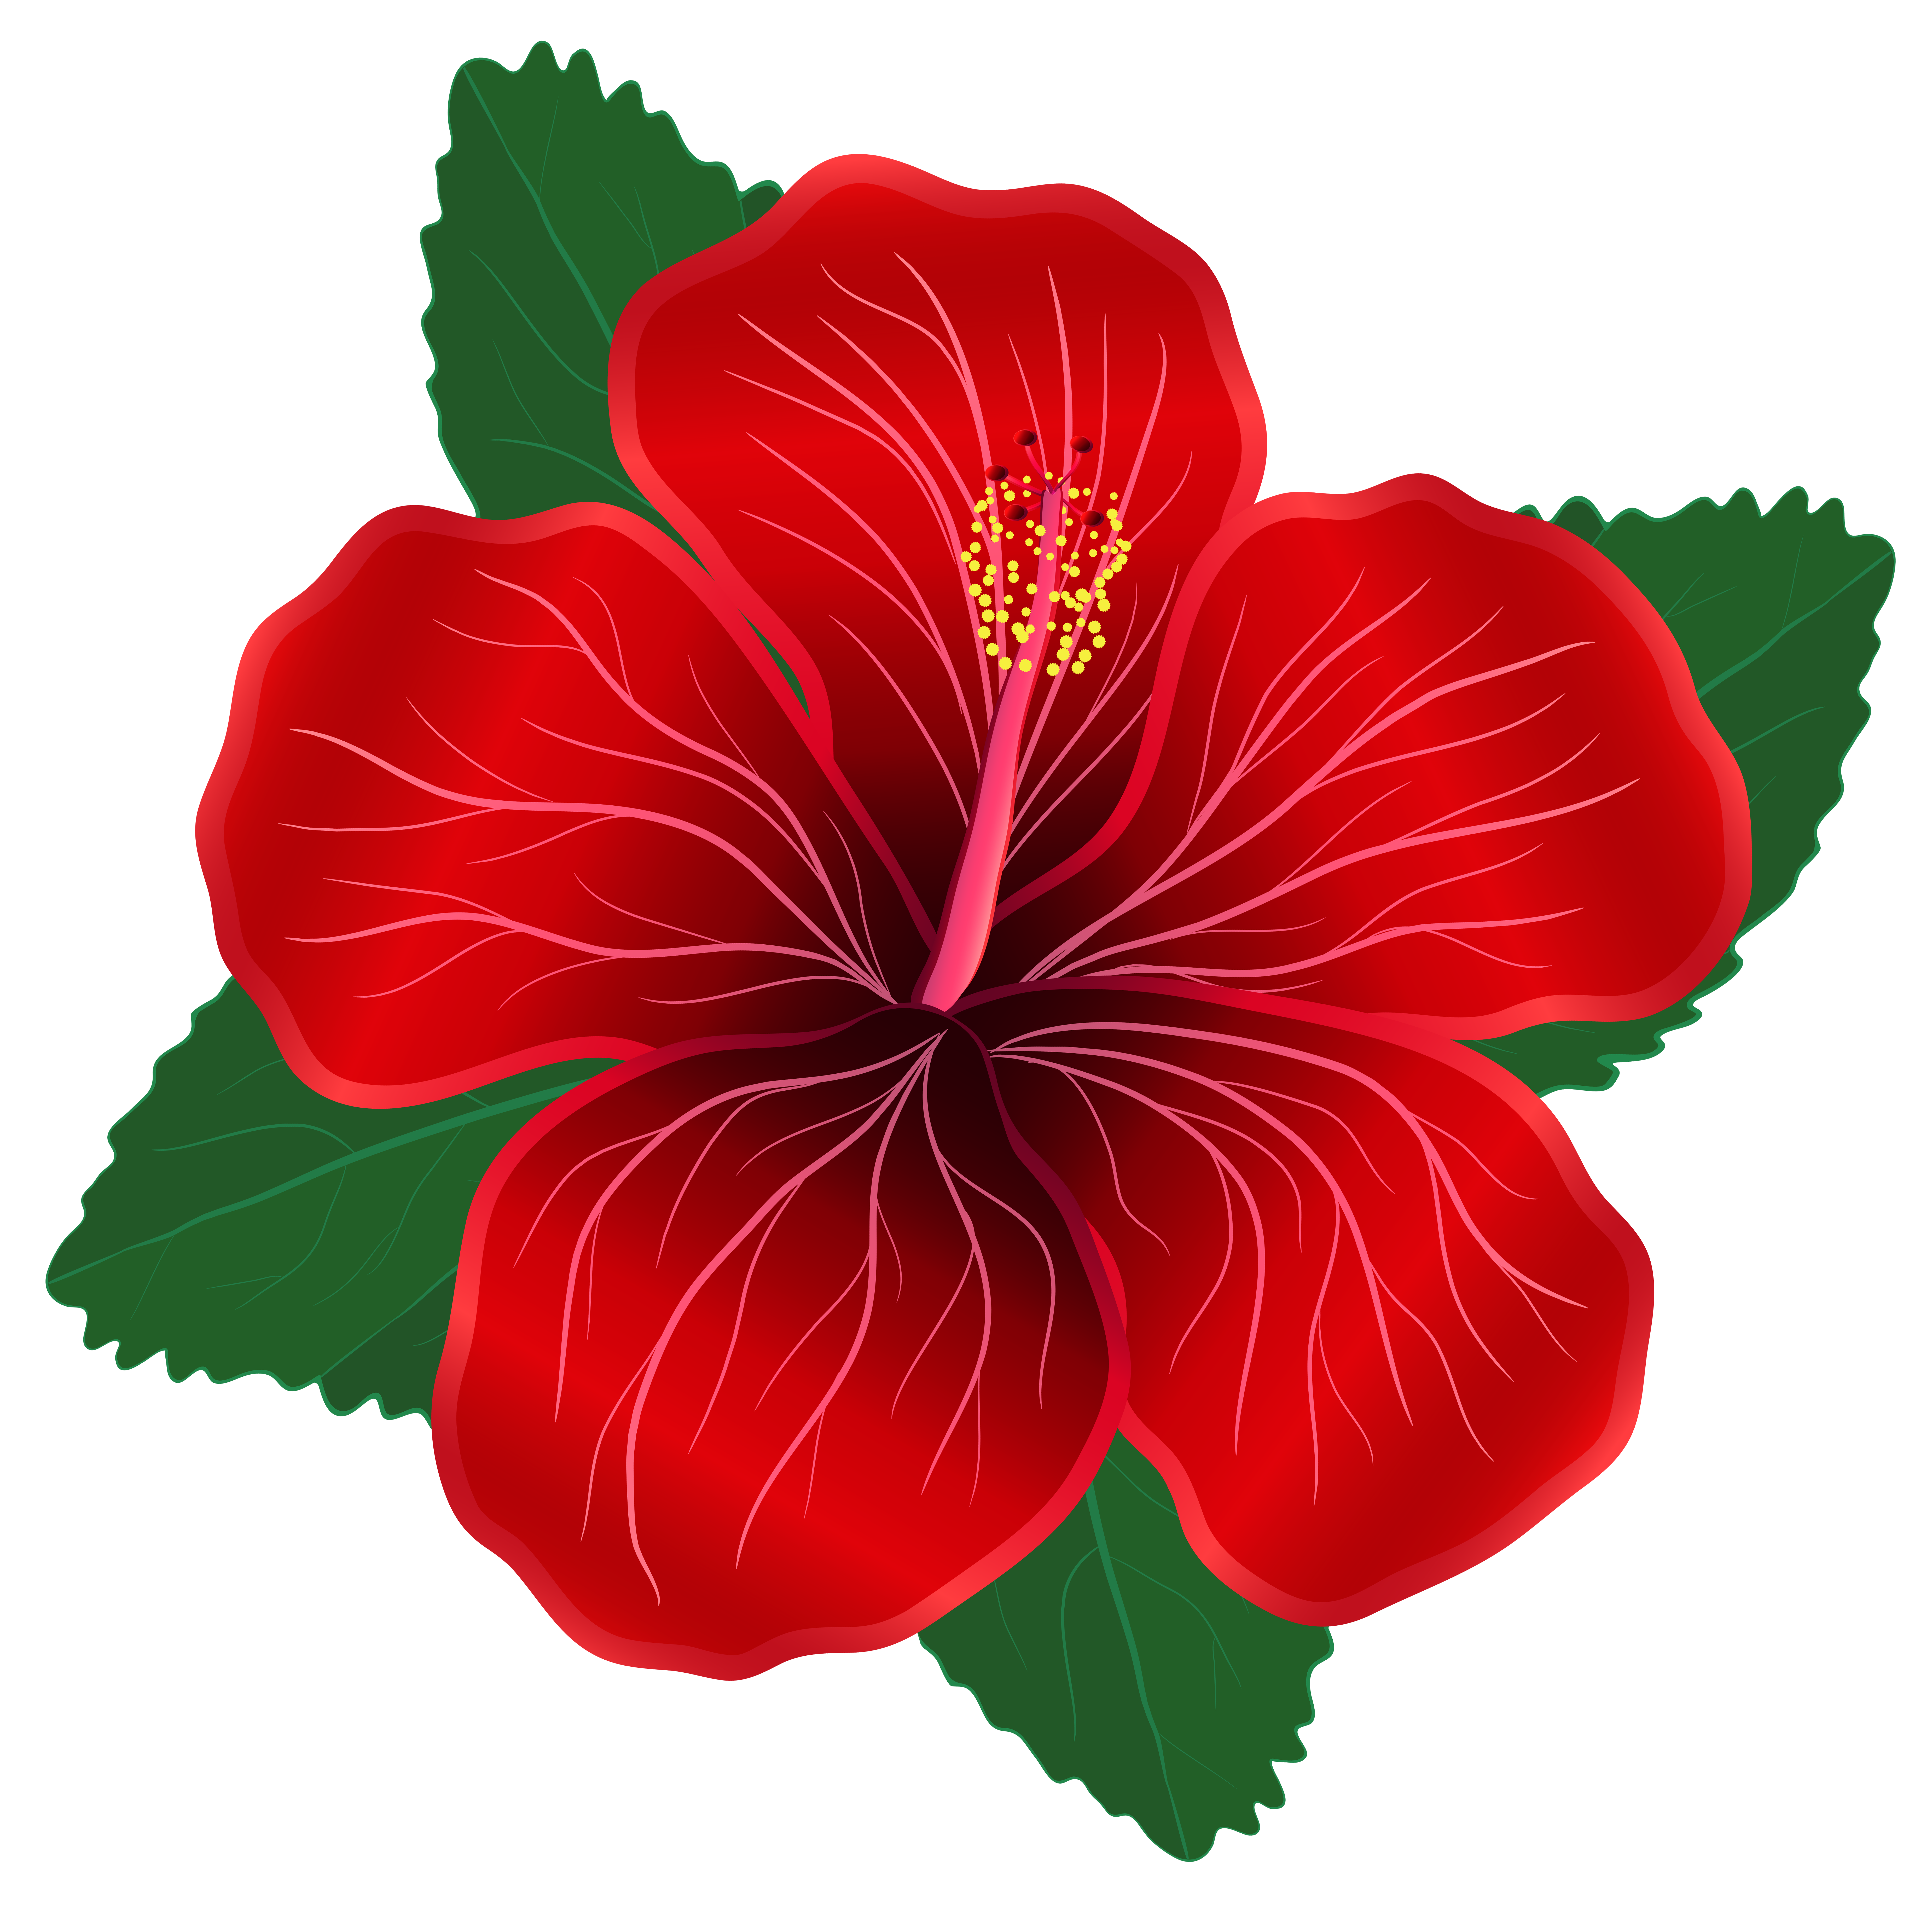 https://gallery.yopriceville.com/var/albums/Free-Clipart-Pictures/Flowers-PNG/Red_Flower_PNG_Clipart_Image.png?m=1438916101